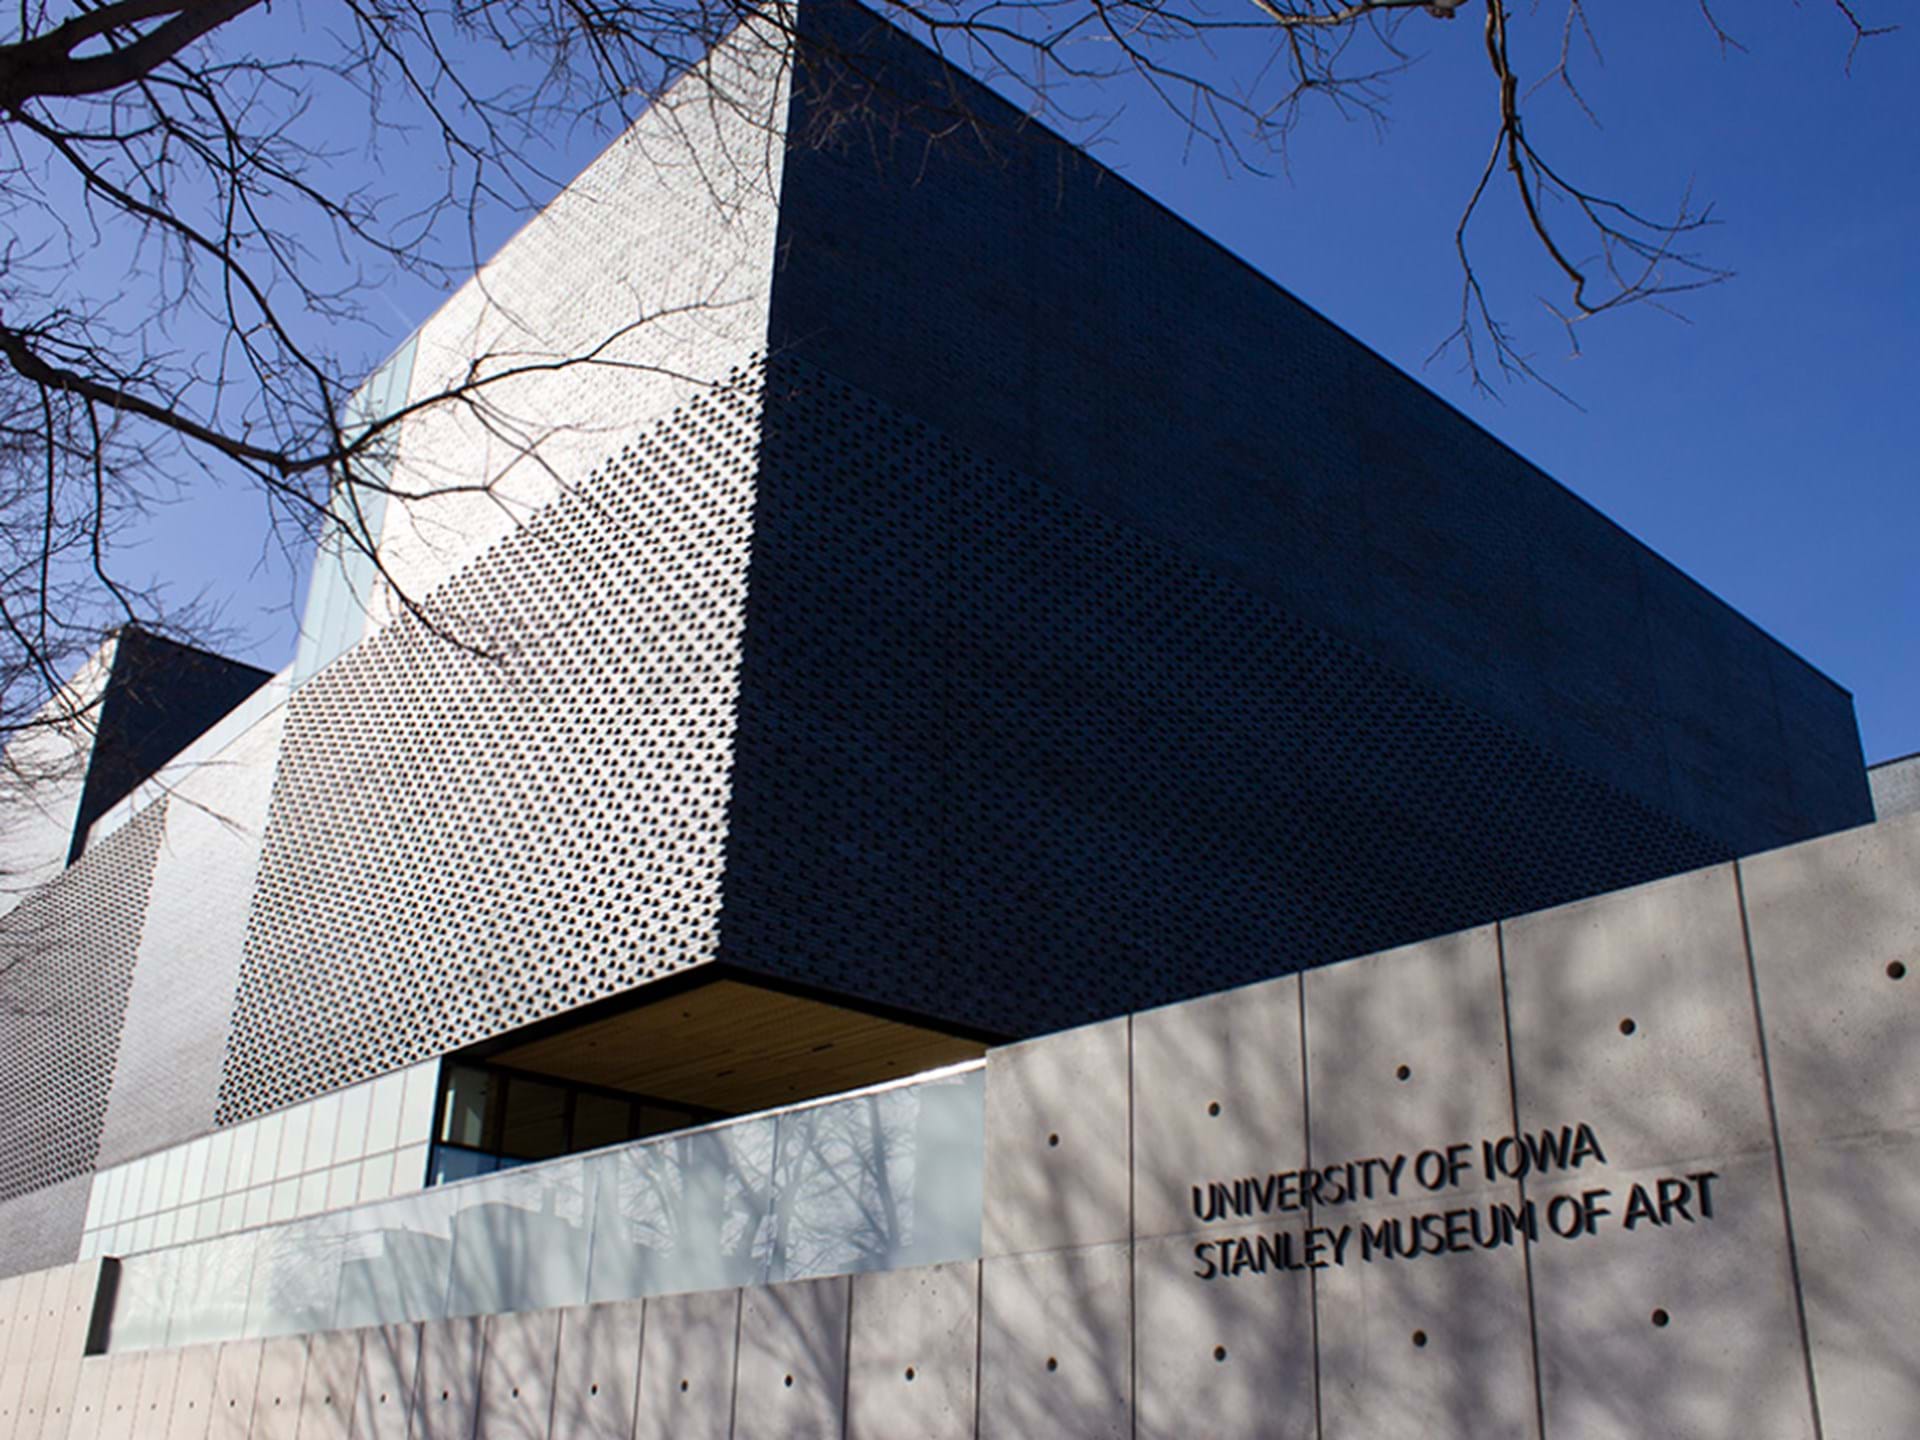 The new University of Iowa Stanley Museum of Art is located close to the corner of Front and Burlington Streets, adjacent to Gibson Square Park, and nestled between the UI Main Library and the Campus Recreation and Wellness Center